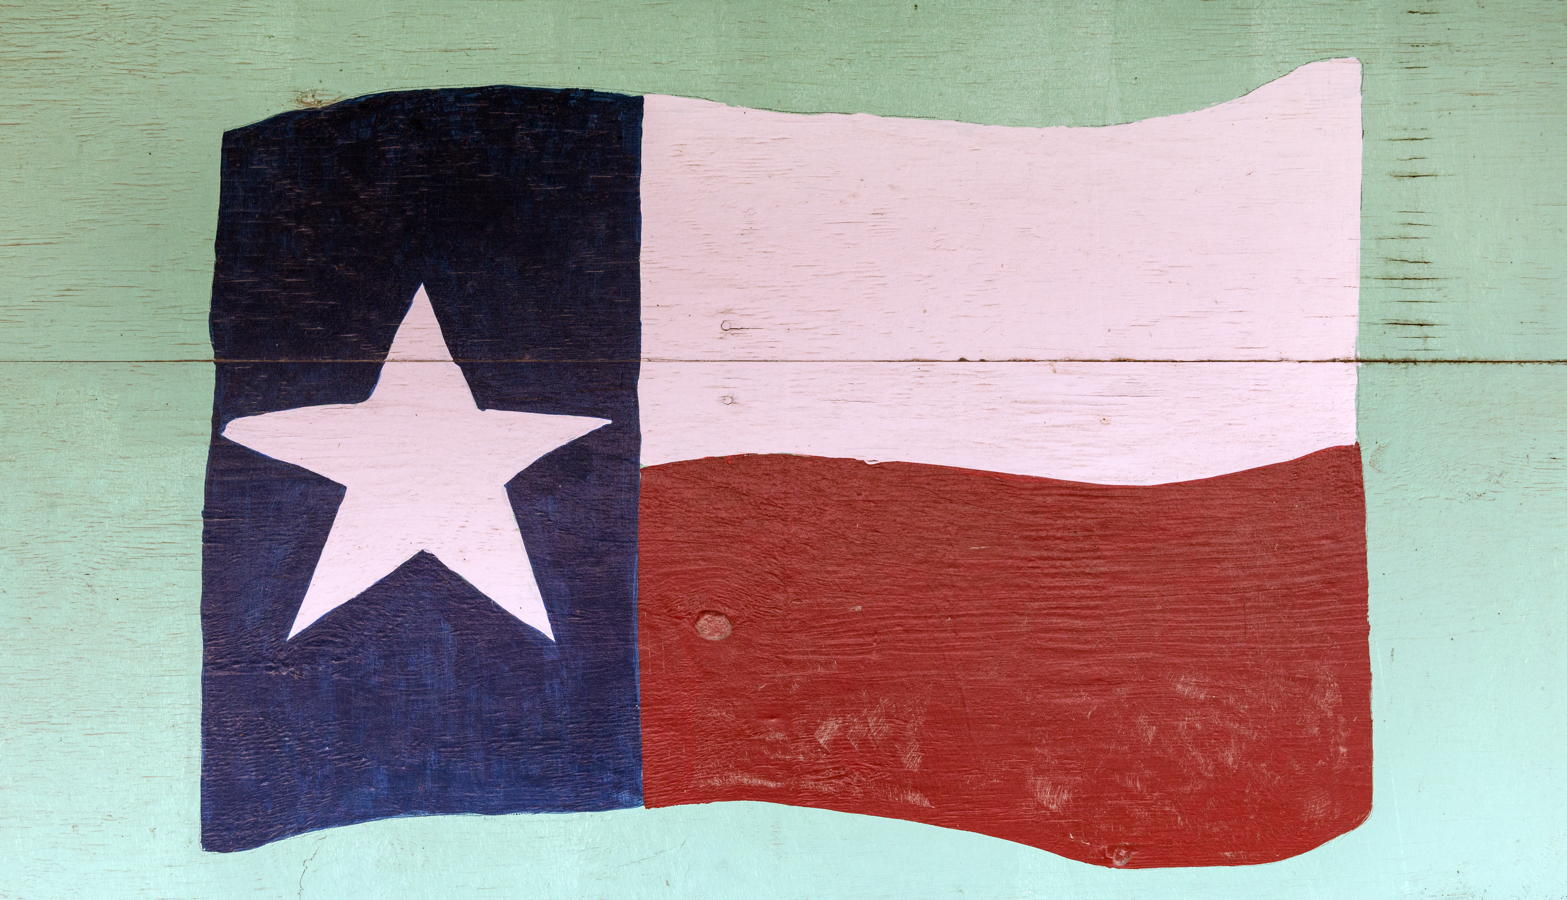 Texas flag on a Pecos wall: “The flag of Texas, depicted on a downtown wall in Pecos, the seat of Reeves County, Texas.” Photo by Carol M. Highsmith.; Texas flag